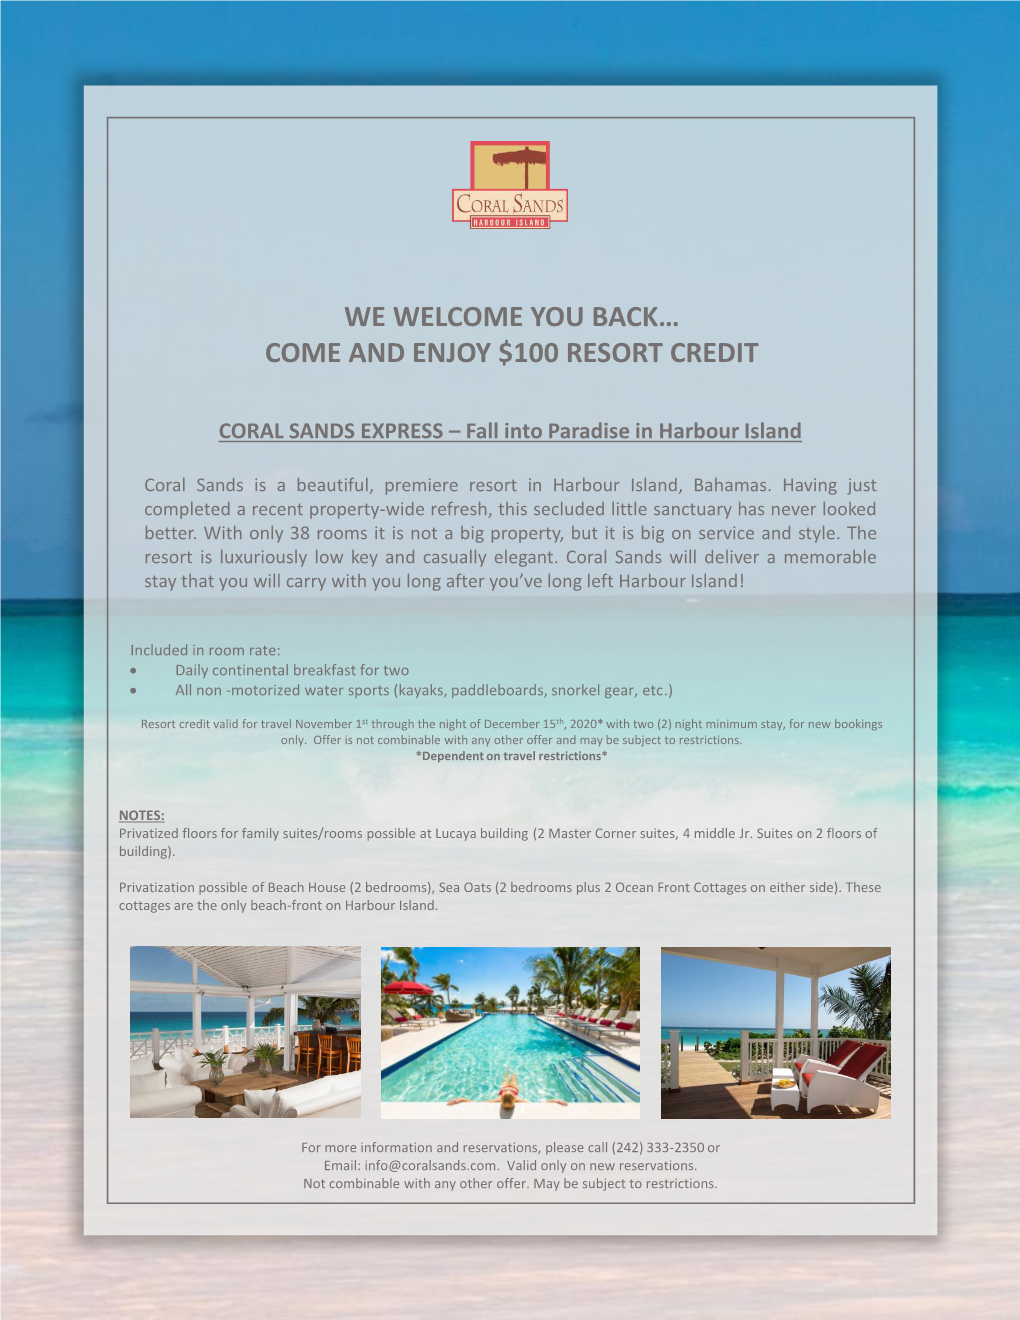 We Welcome You Back… Come and Enjoy $100 Resort Credit